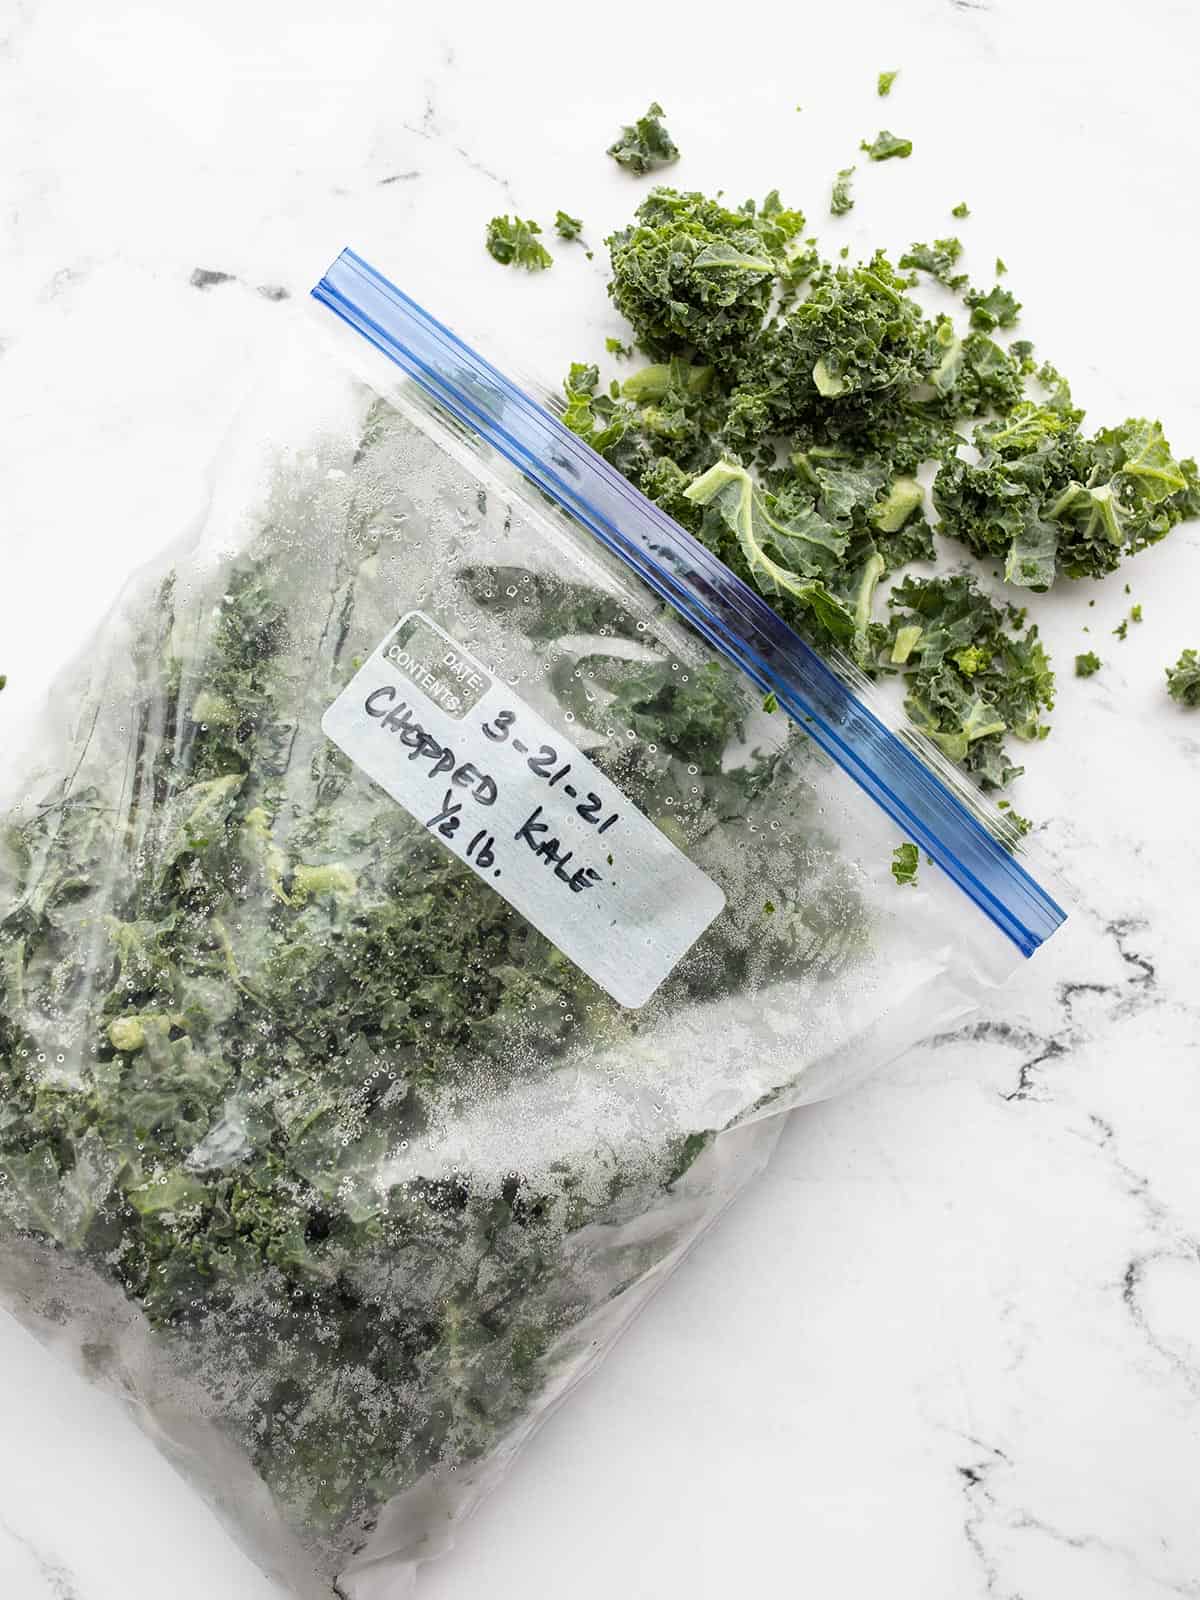 A freezer bag of kale spilling out onto a marble surface